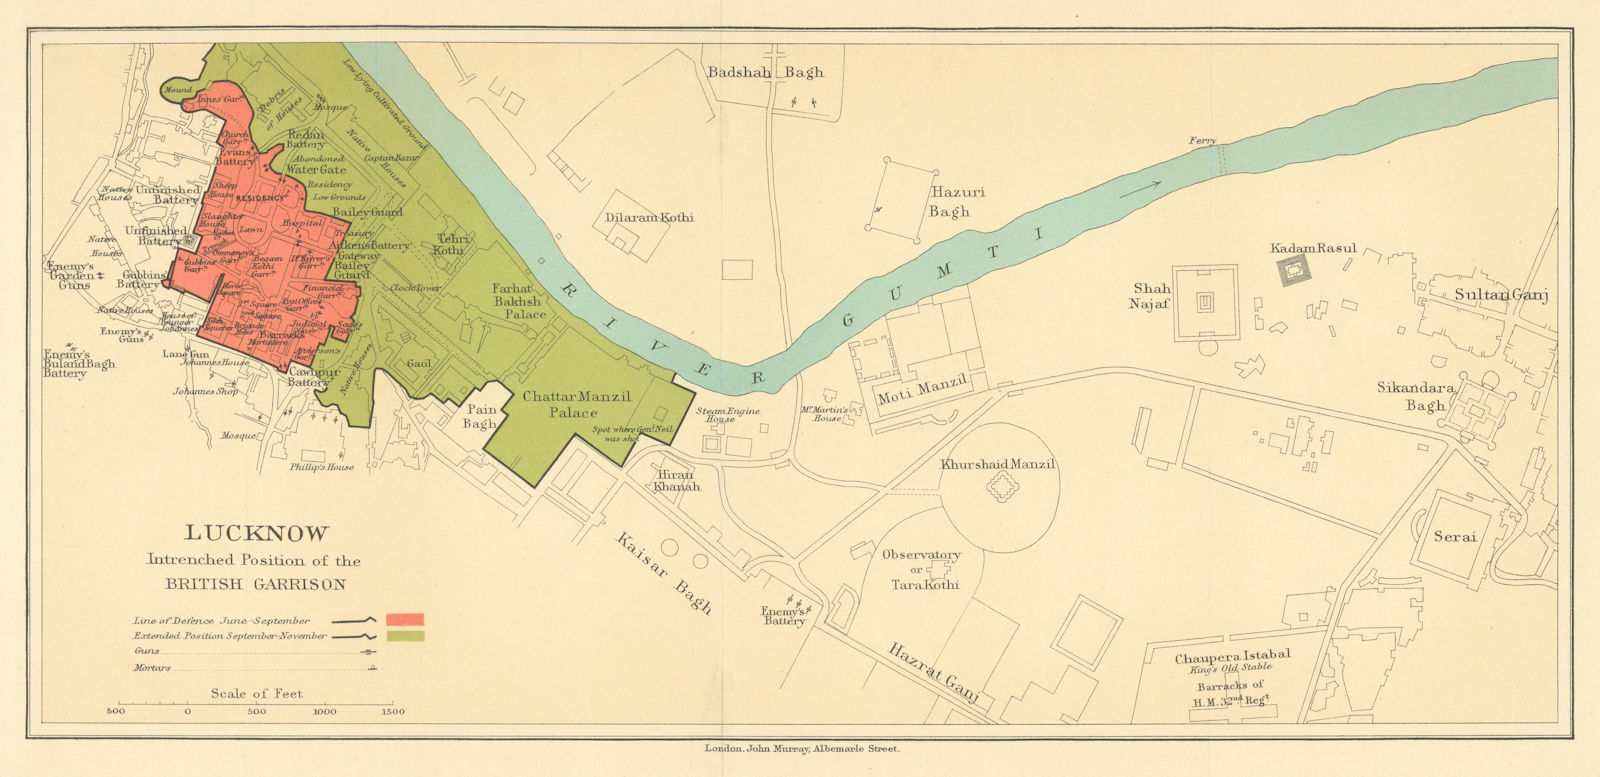 SIEGE OF LUCKNOW.showing British Garrison positions.1857 Indian Mutiny 1905 map